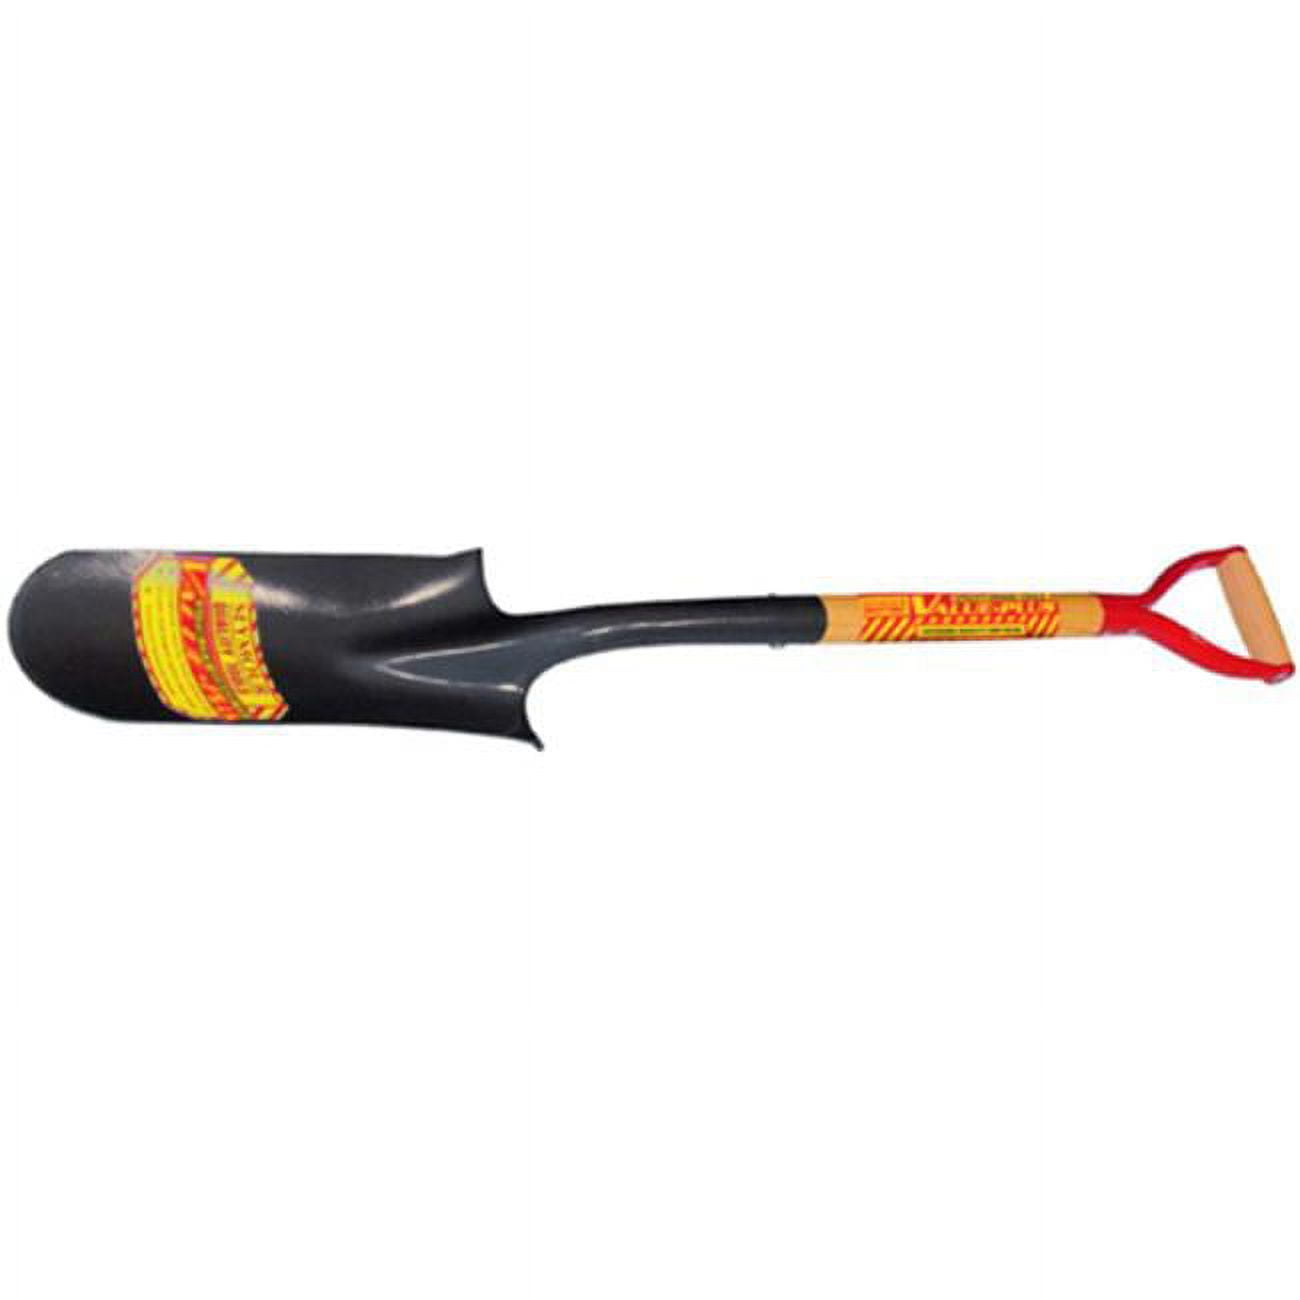 49137 Drain Spade Shovel - 14 In. Head With Rear Rolled Step & 30 In. Hardwood Handle